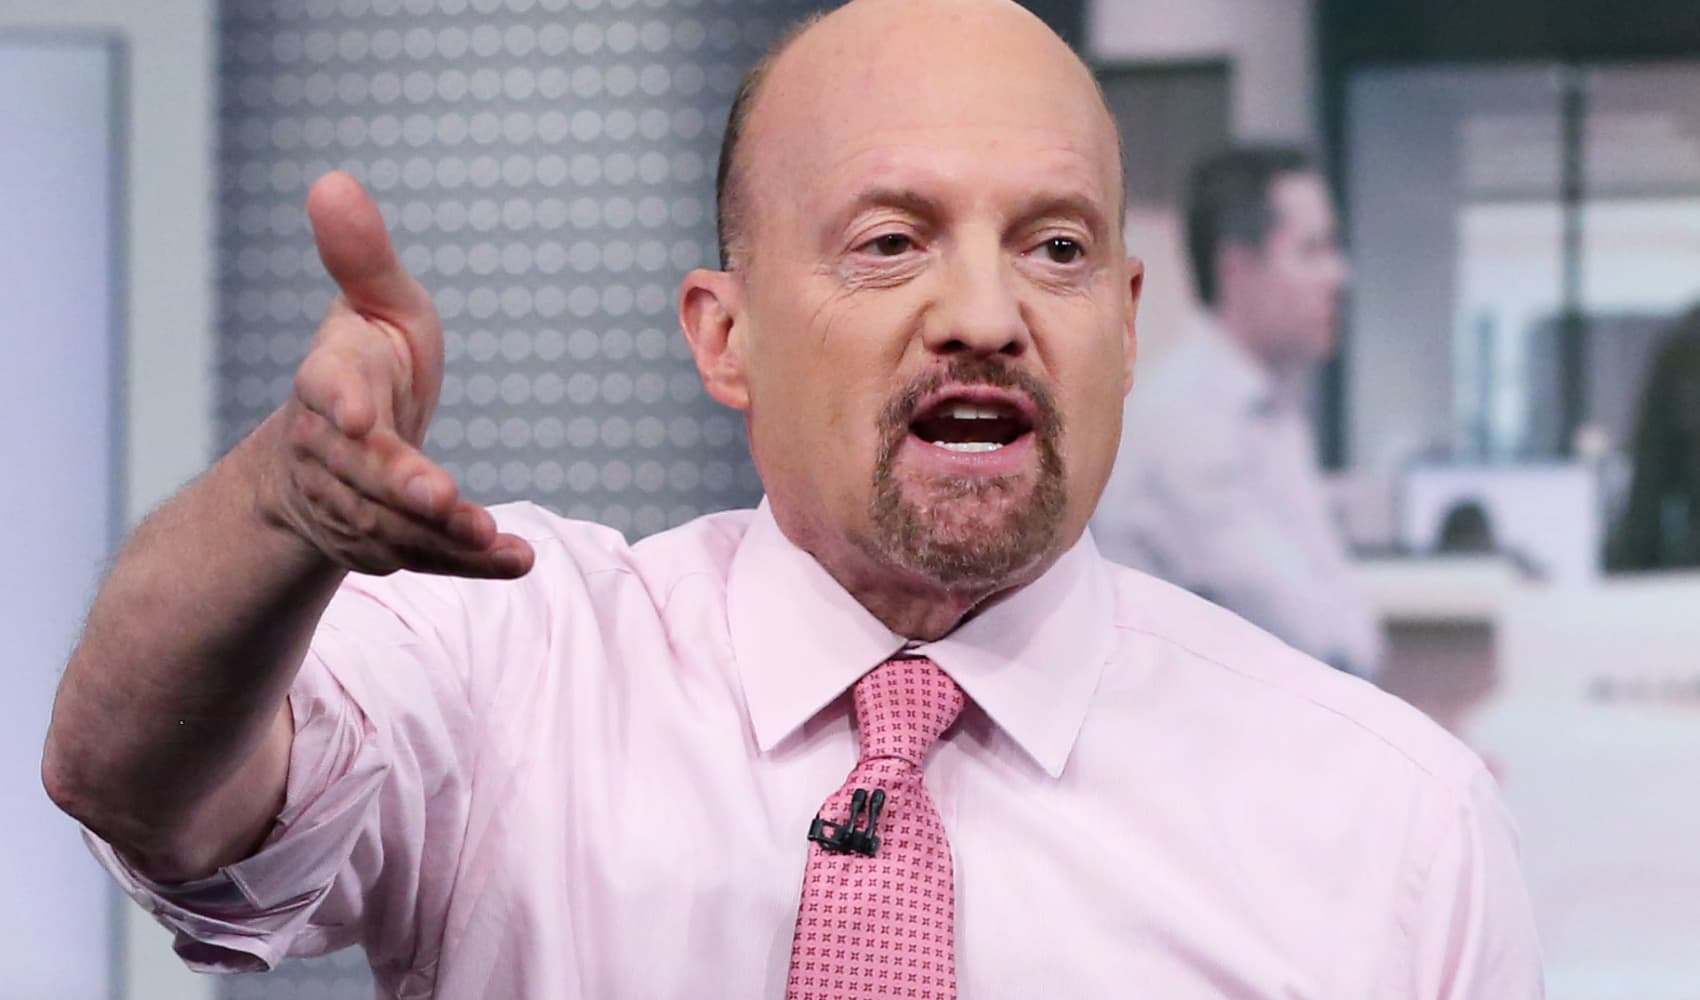 Cramer says to stick with good companies even when facing short-term losses